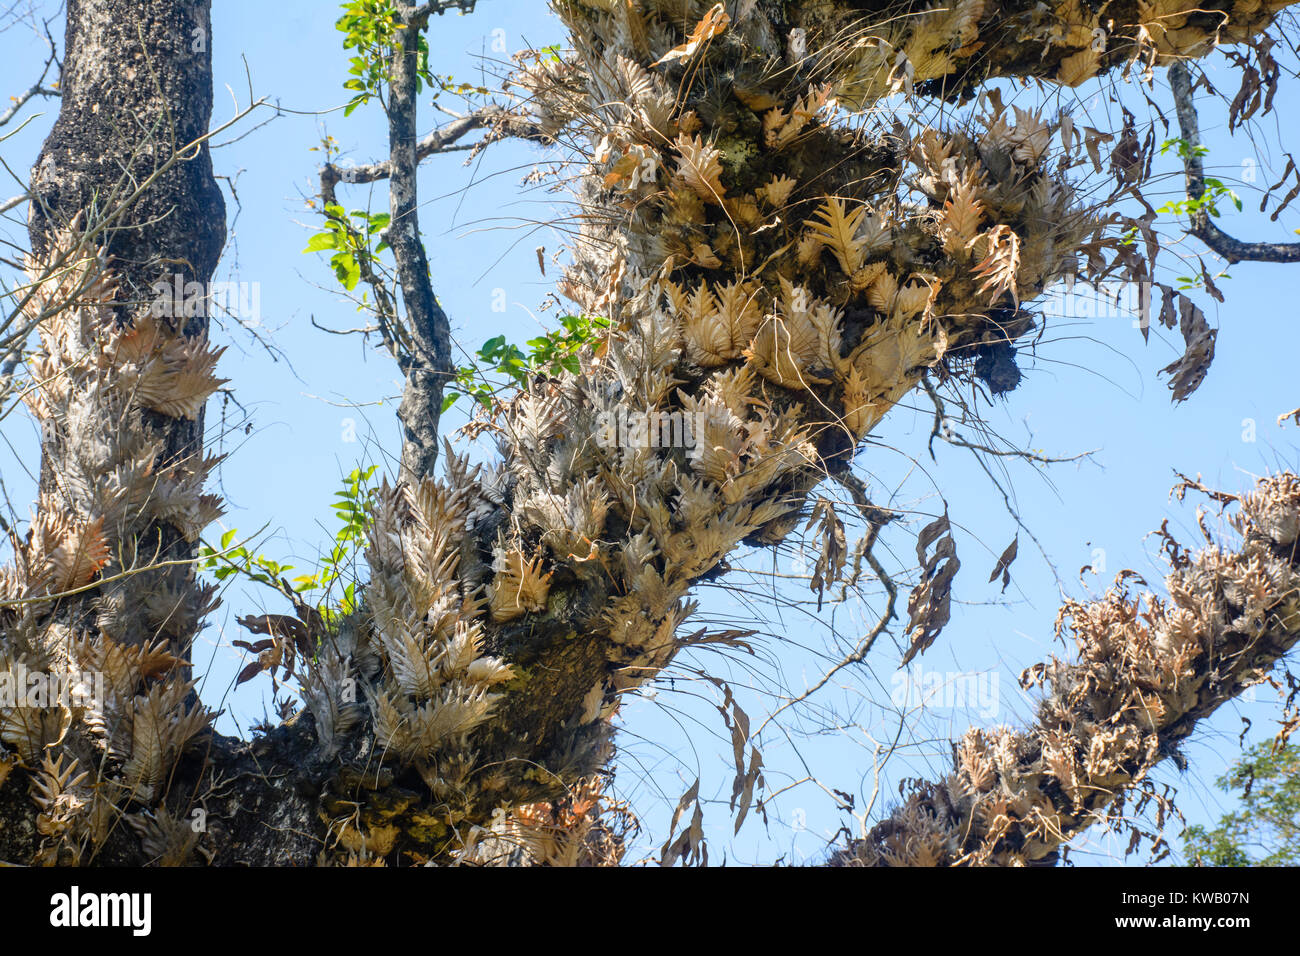 photo of dry staghorn fern on the tree Stock Photo